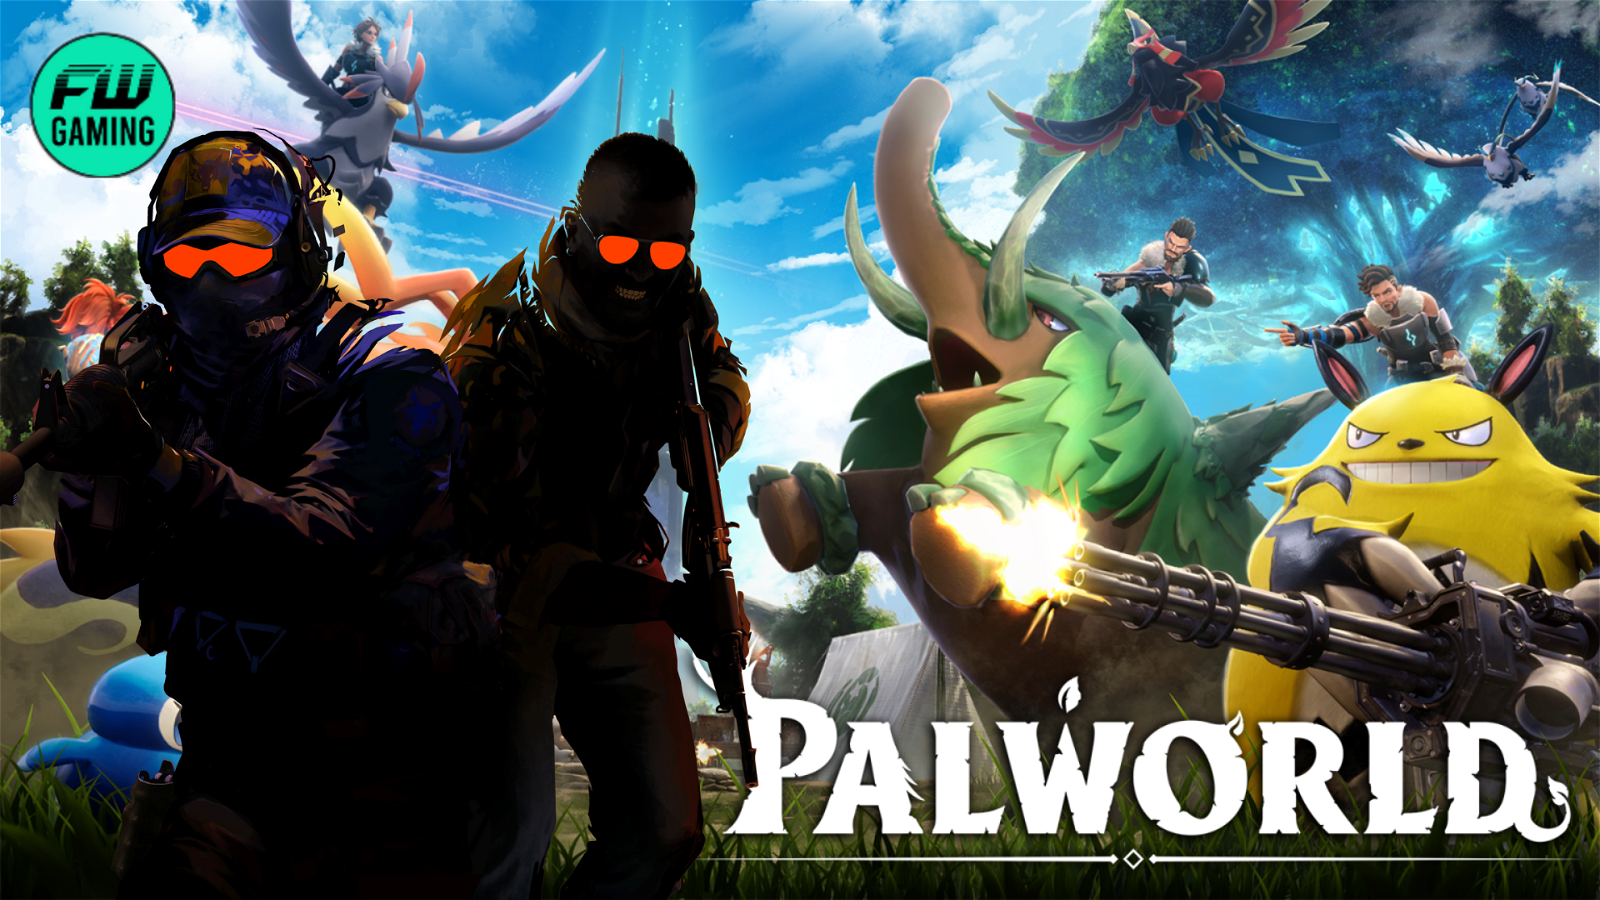 Palworld Has Broken One Counter Strike 2 Record Over on Steam, and It Is Unbelievable